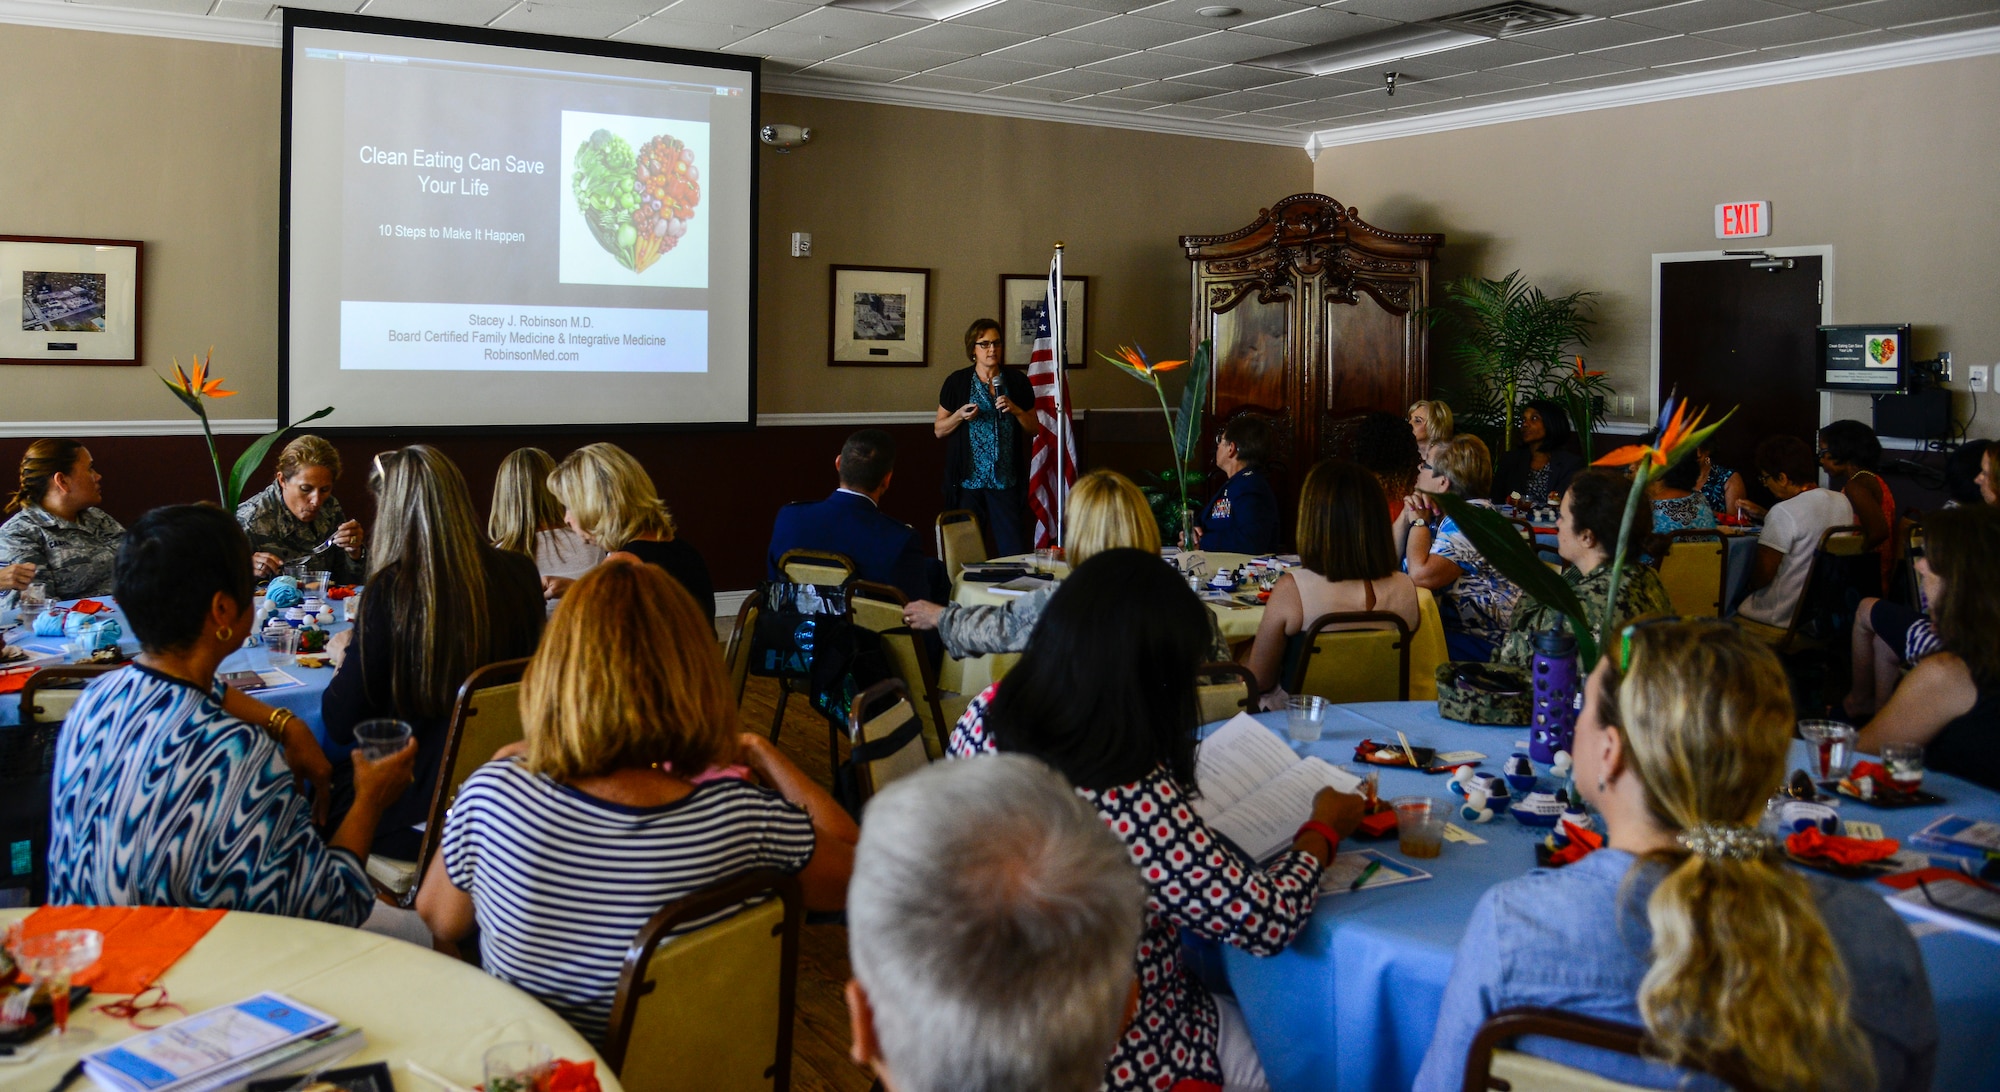 Dr. Stacey Robinson, doctor of concierge medicine and keynote speaker, provides tips for clean eating to members of Team MacDill during the 20th Annual Women’s Health Seminar and Luncheon at Memorial Hospital, Tampa, Fla., May 24, 2016. The theme for this event was ‘Cruise to a New Destination: Gateway to Health and Wellness.’ (U.S. Air Force photo by Staff Sgt. Melanie Hutto)